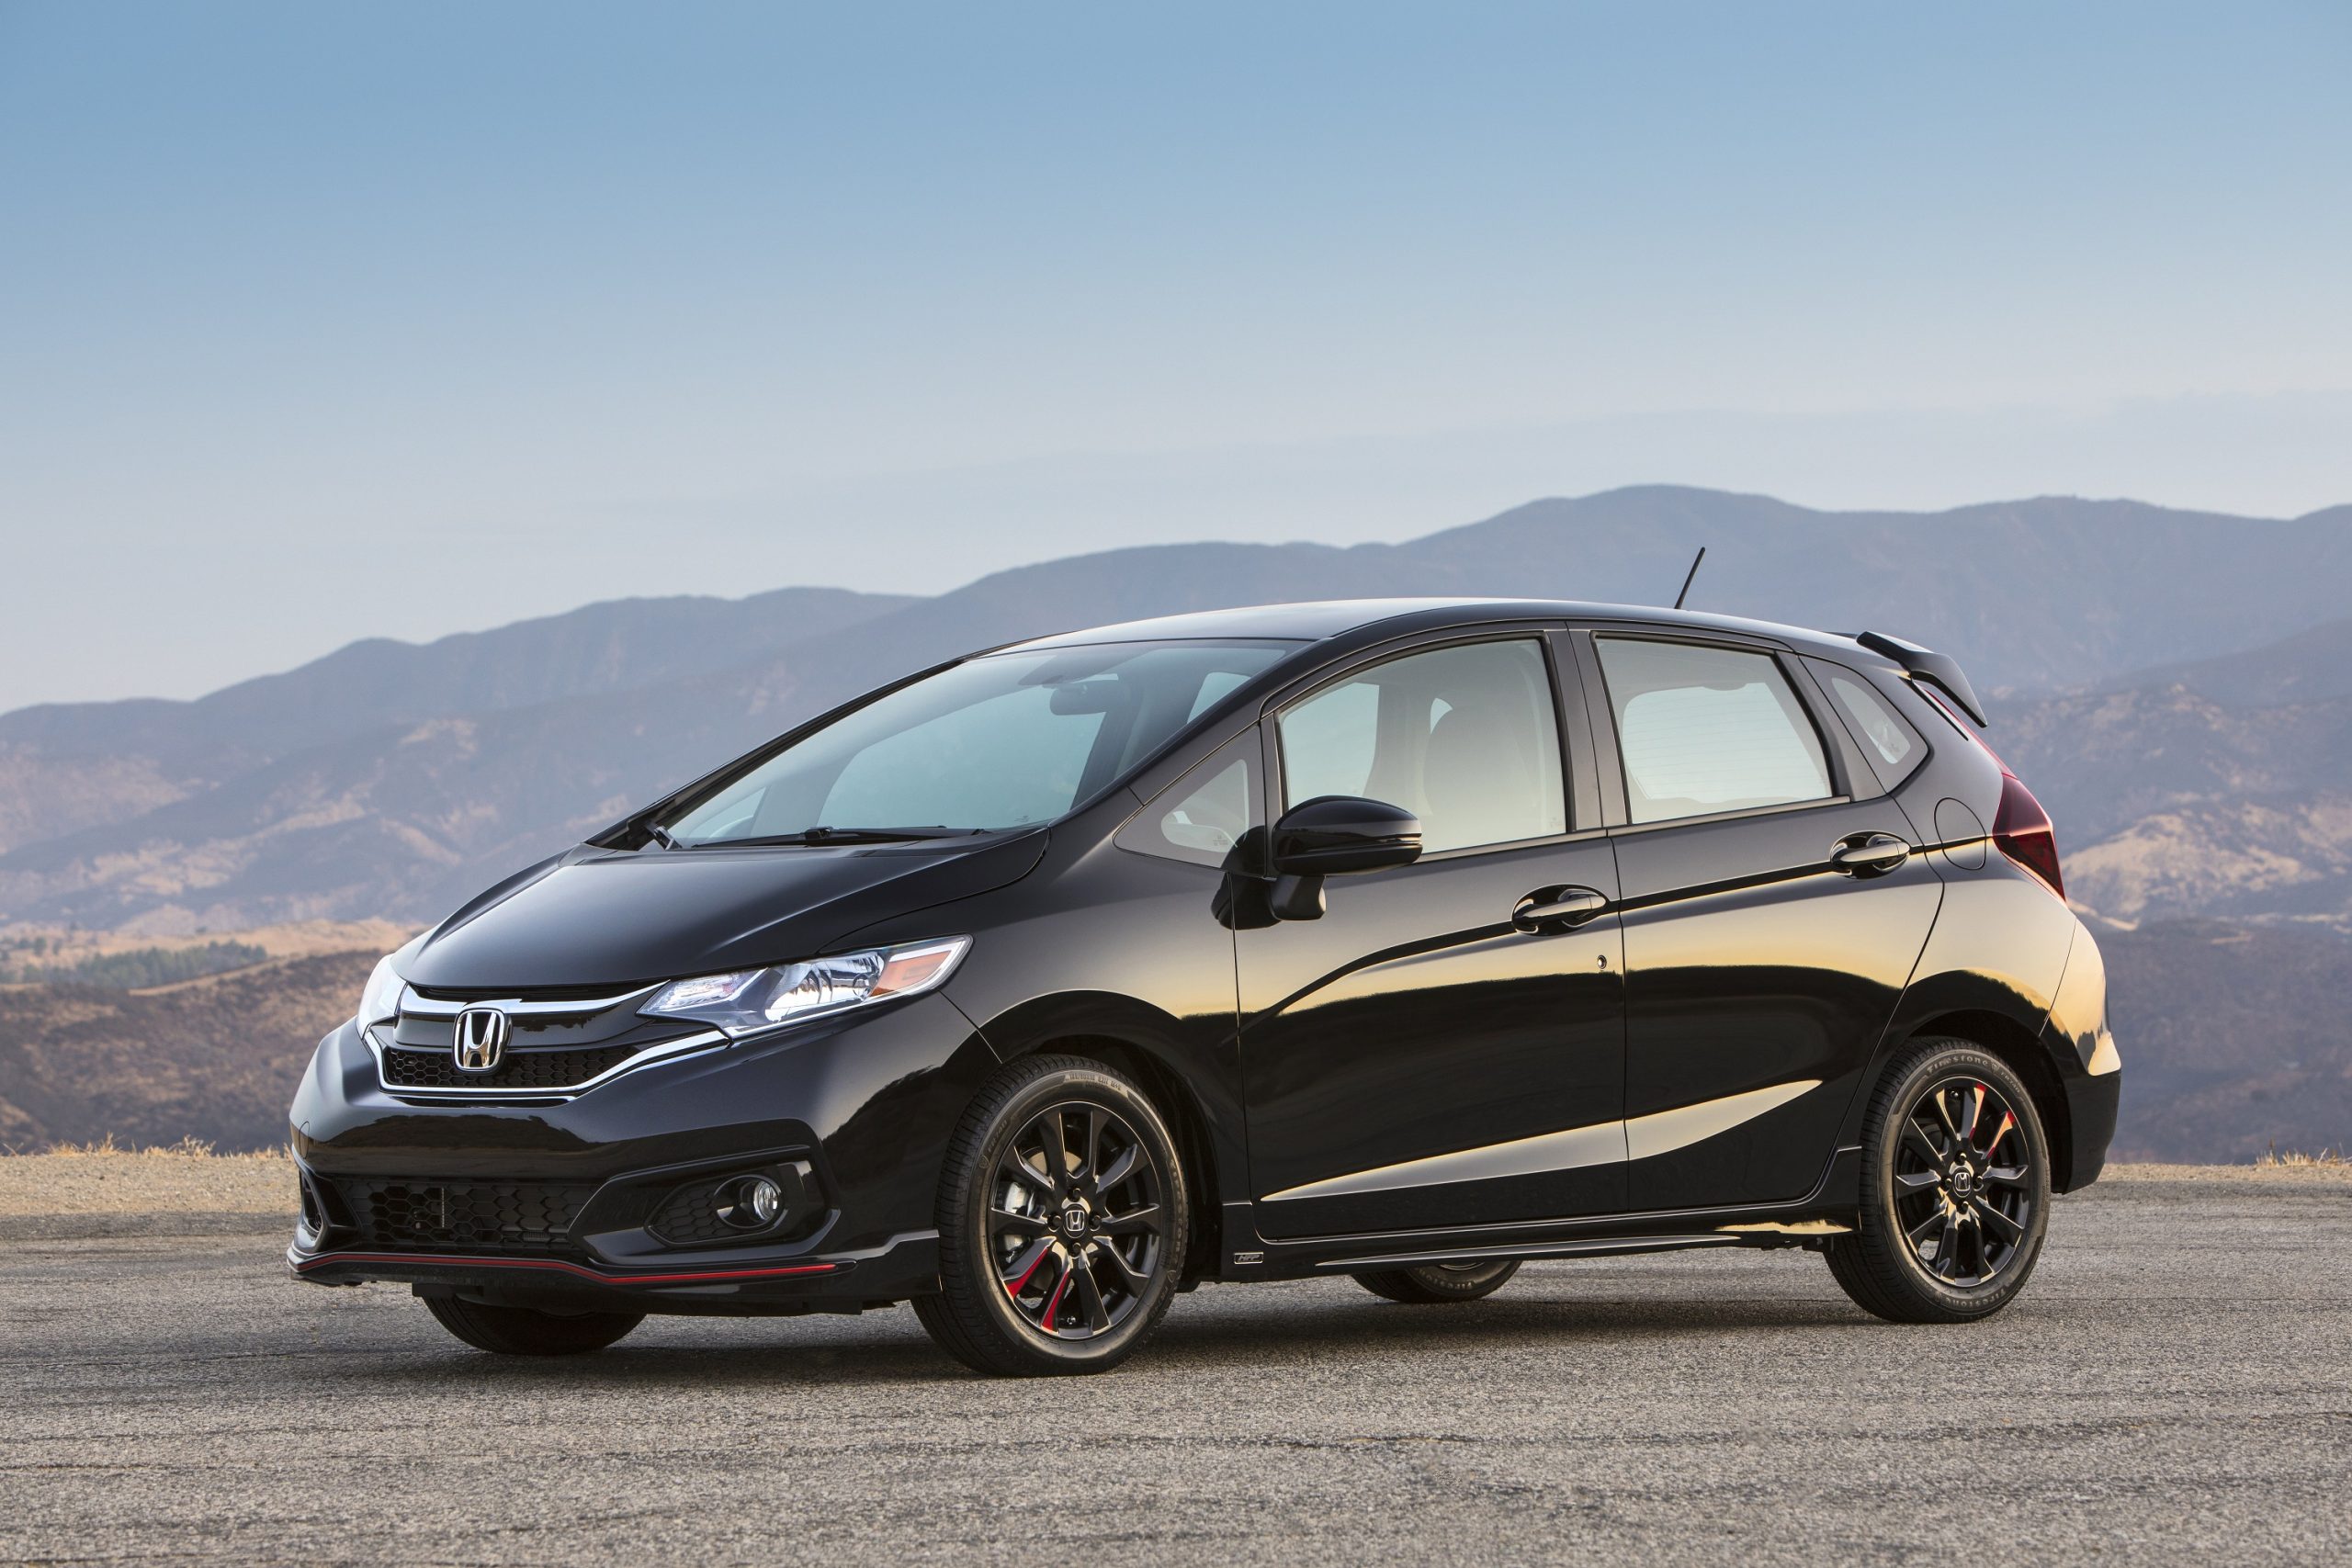 A black Honda fit, the Chevy Spark's closest competitor, shot from the 3/4 angle